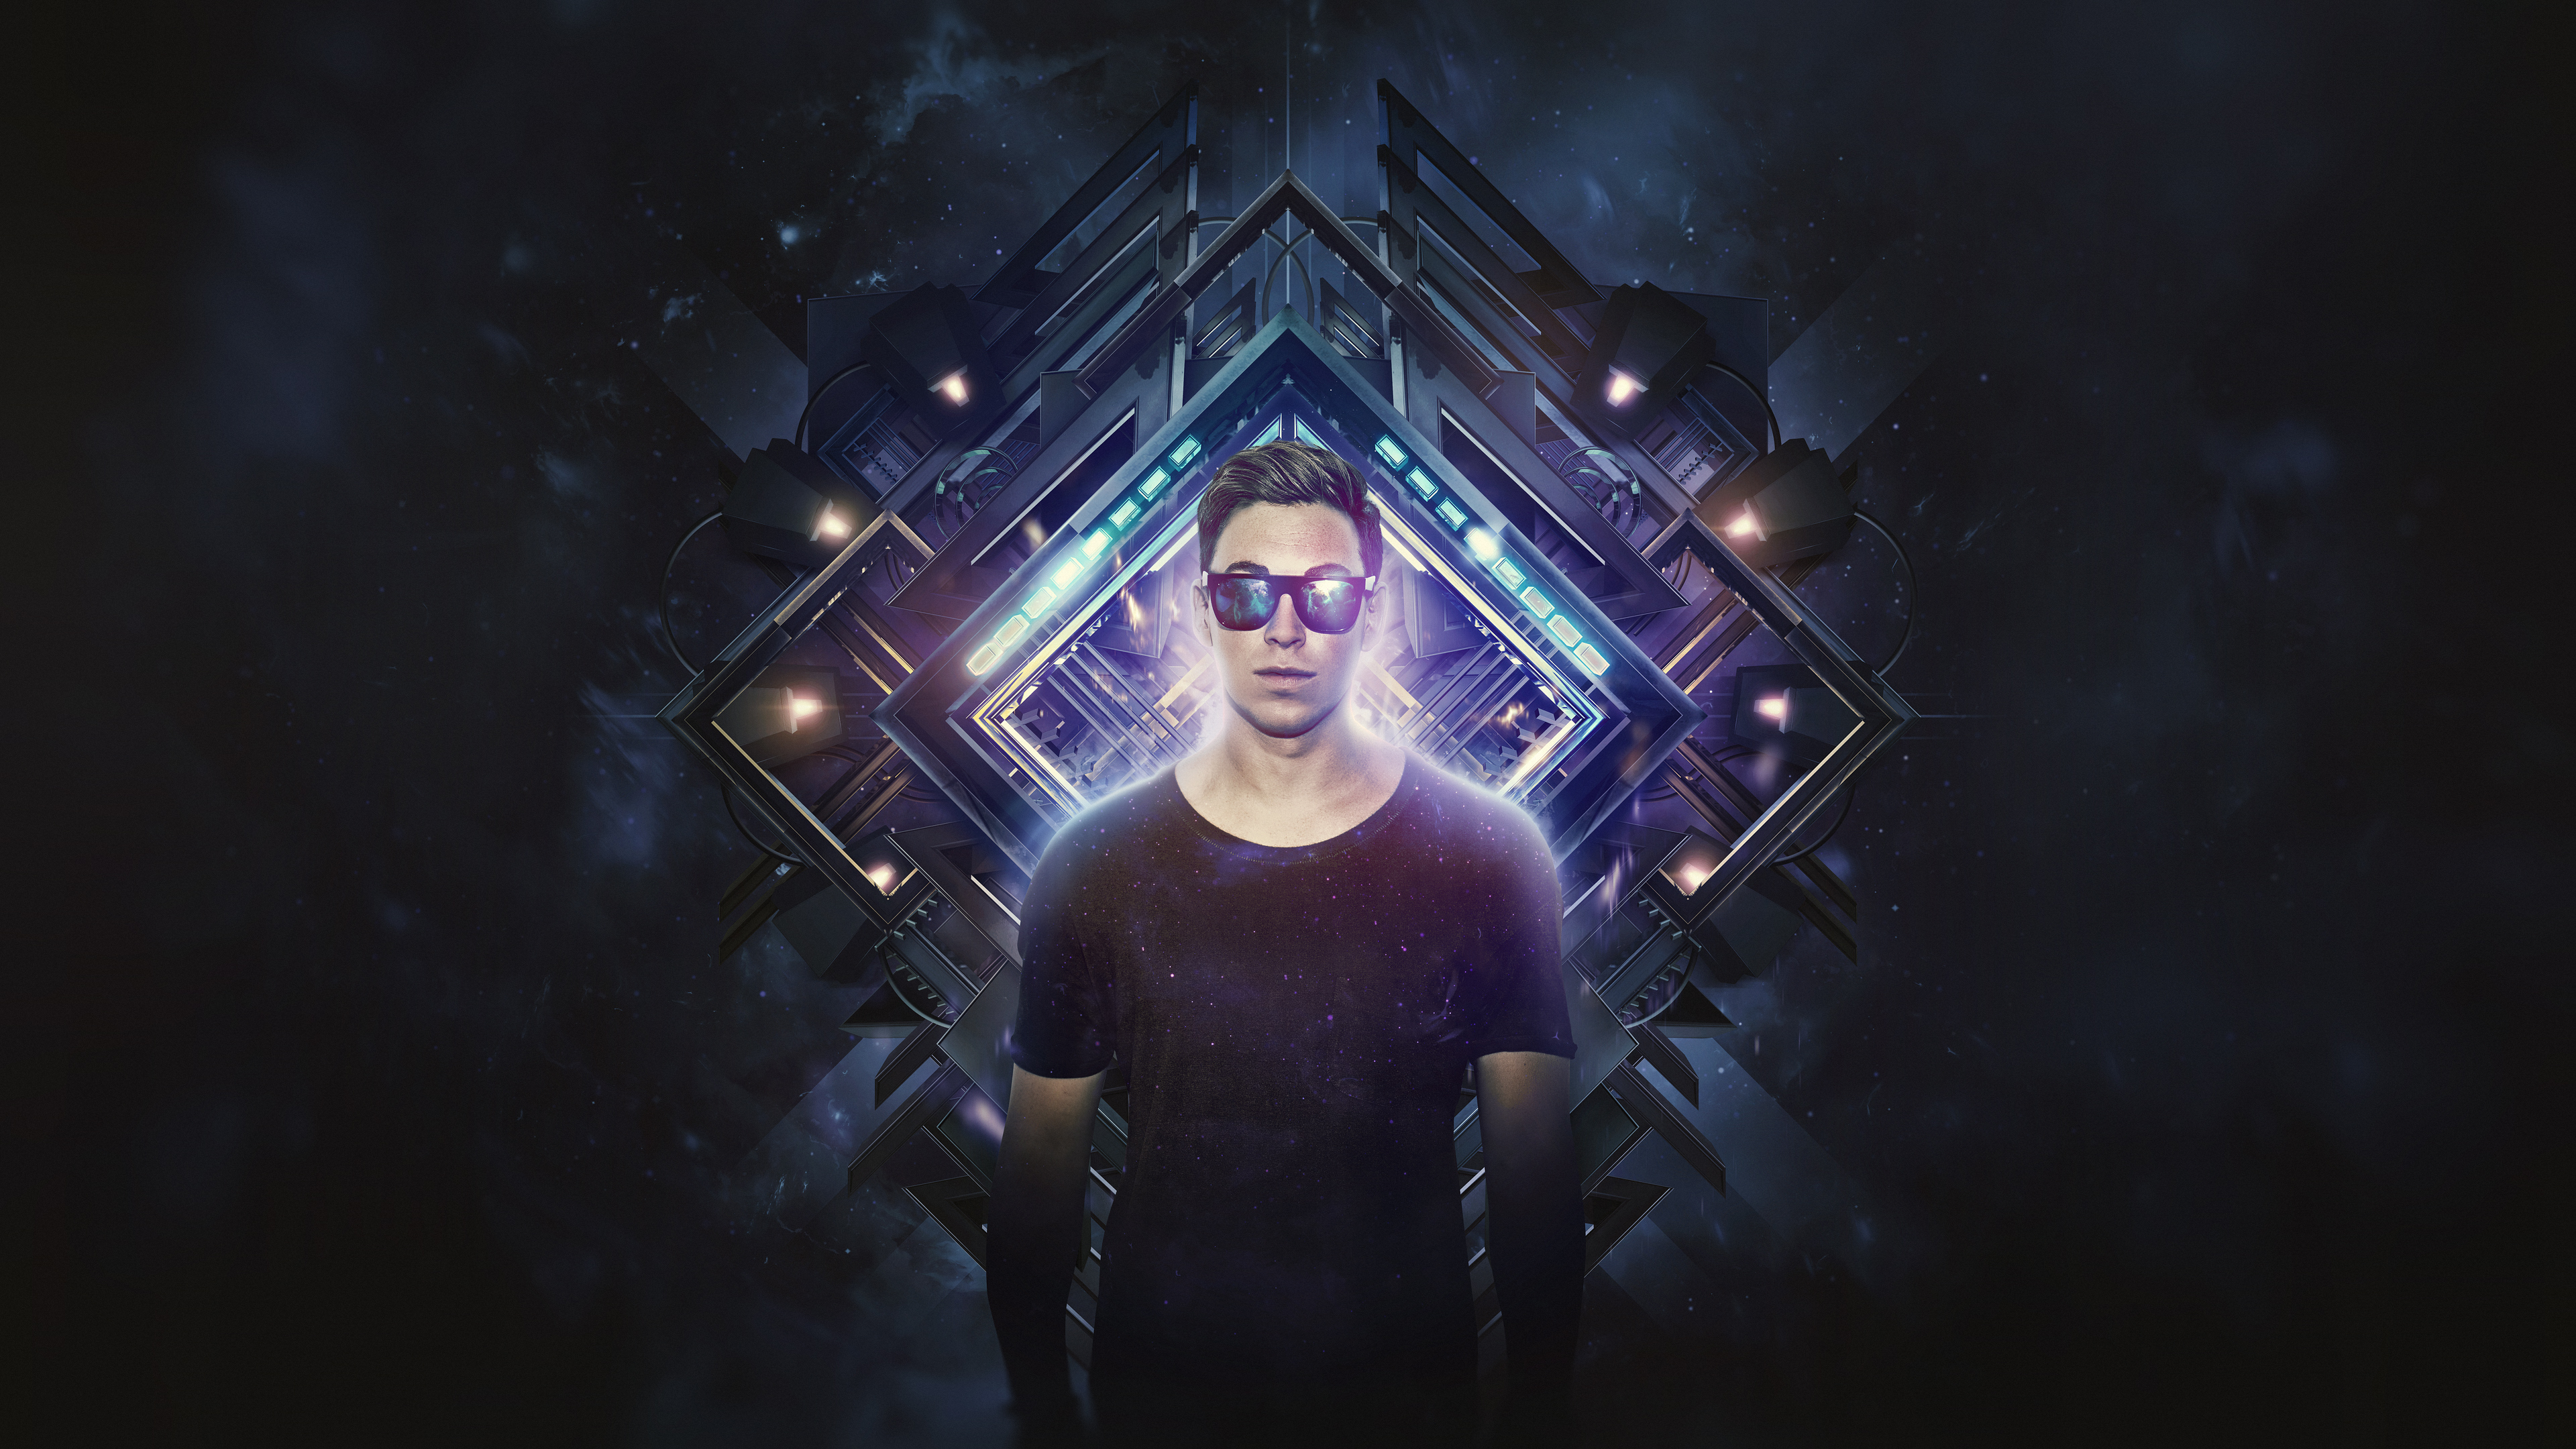 hardwell wallpaper,light,darkness,photography,space,cool